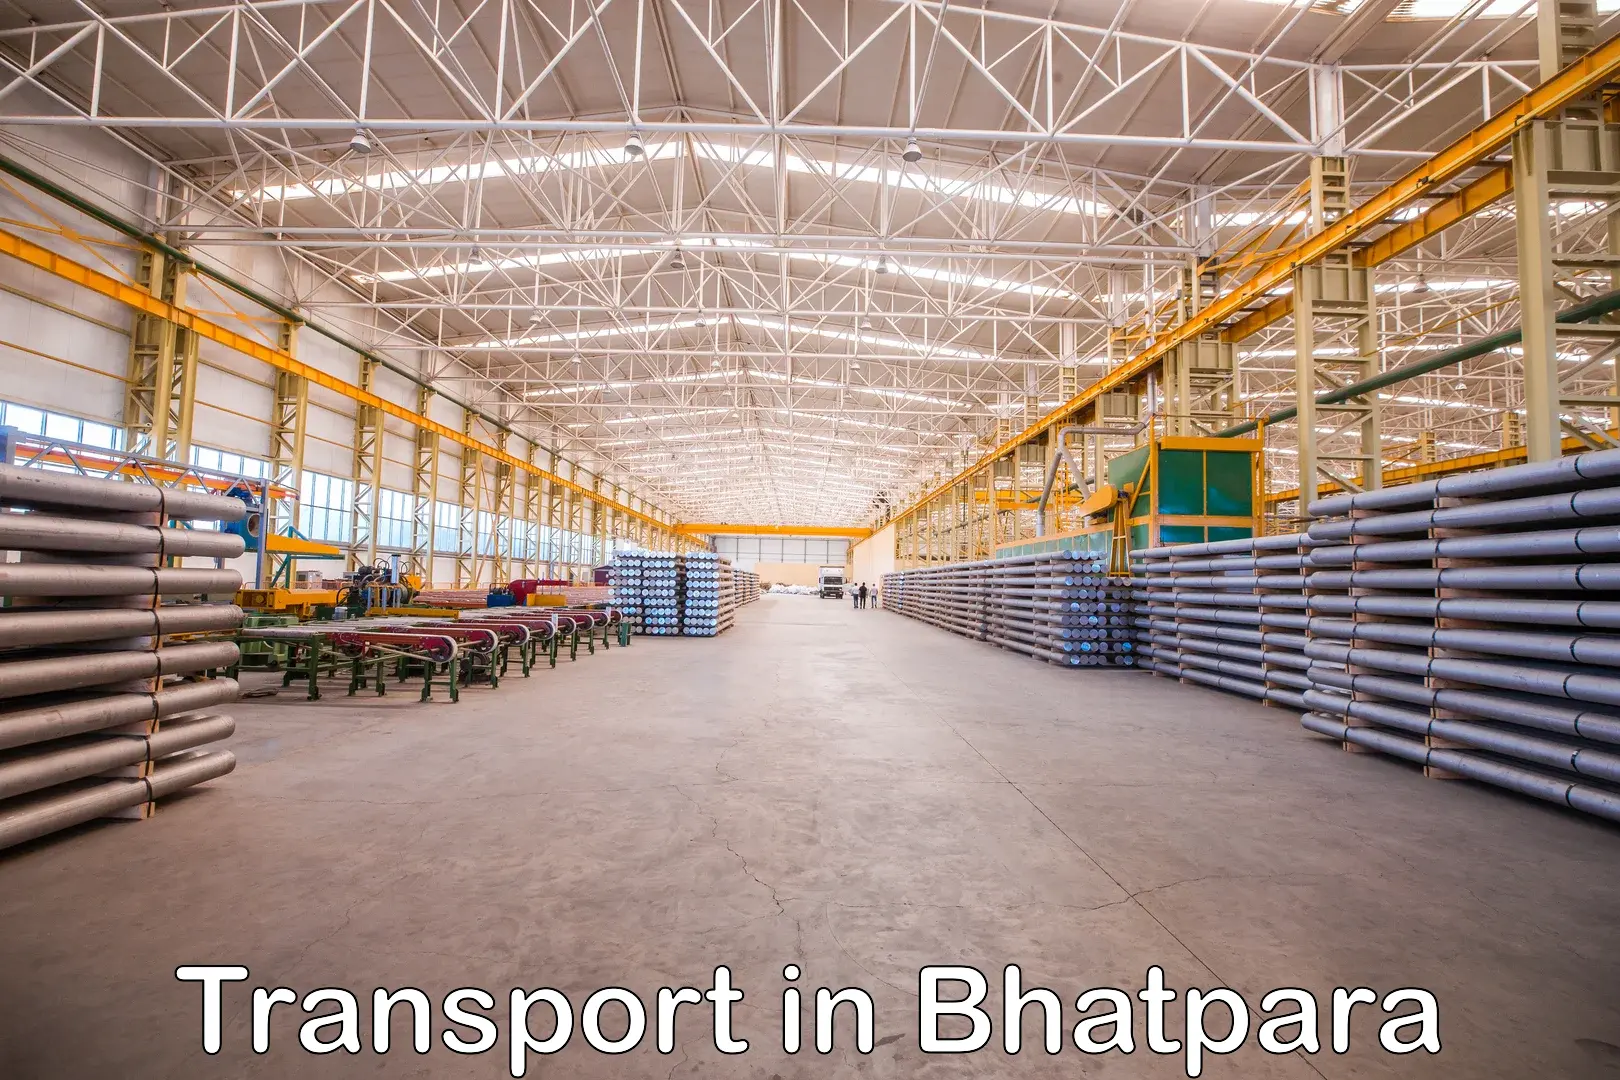 Commercial transport service in Bhatpara